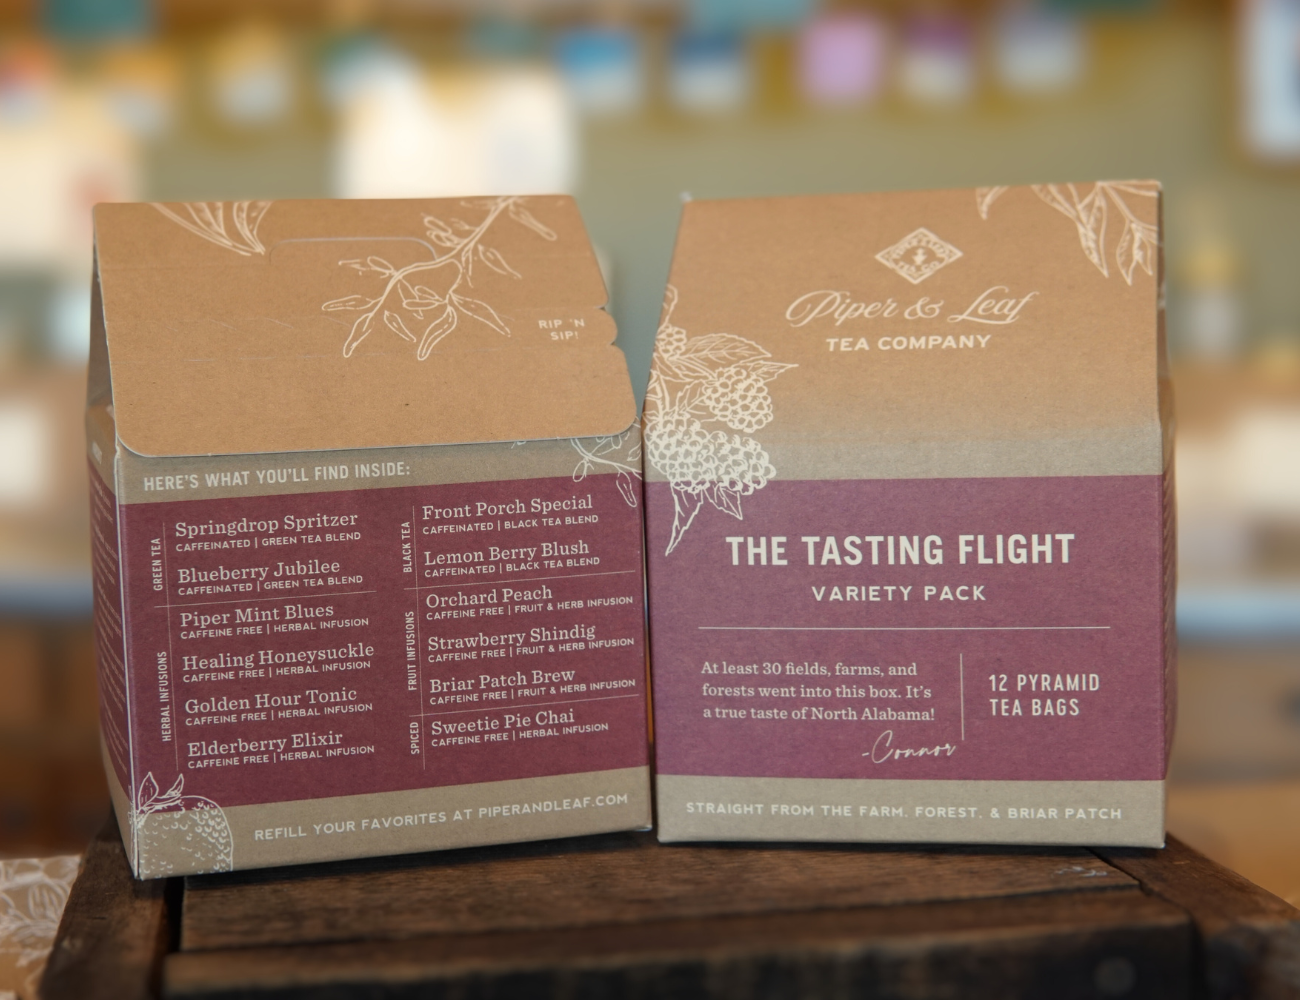 Two individually wrapped tea bag sachets from Piper & Leaf Tea Co., featuring a "Tea Tasting Flight" variety pack with different flavors listed.